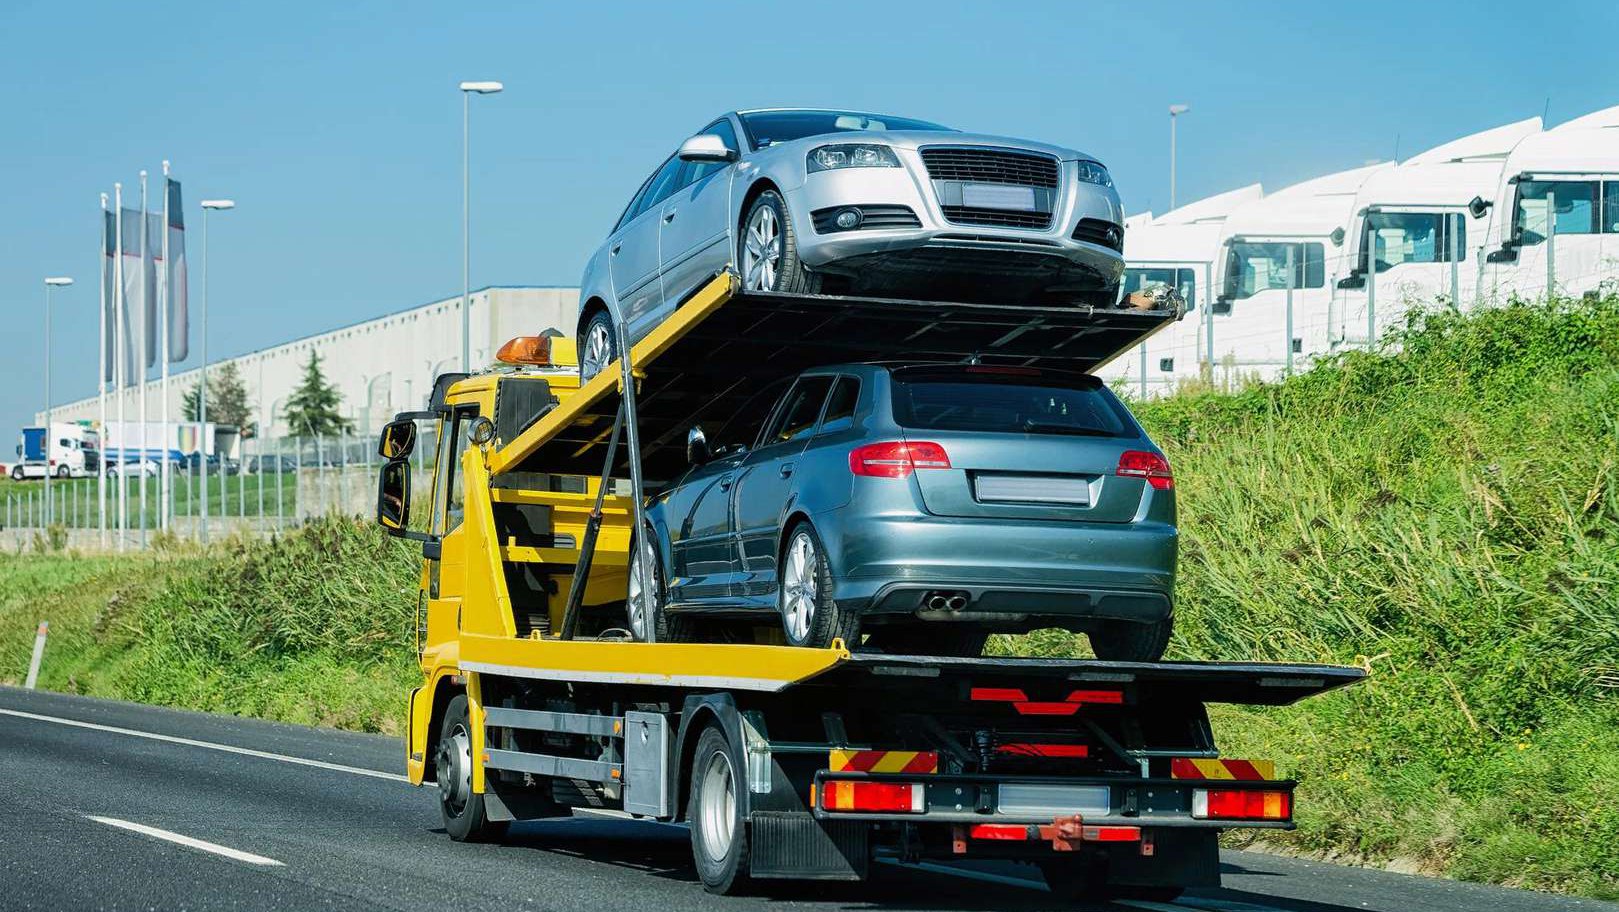 Don't panic: The best car evacuation services in Batumi